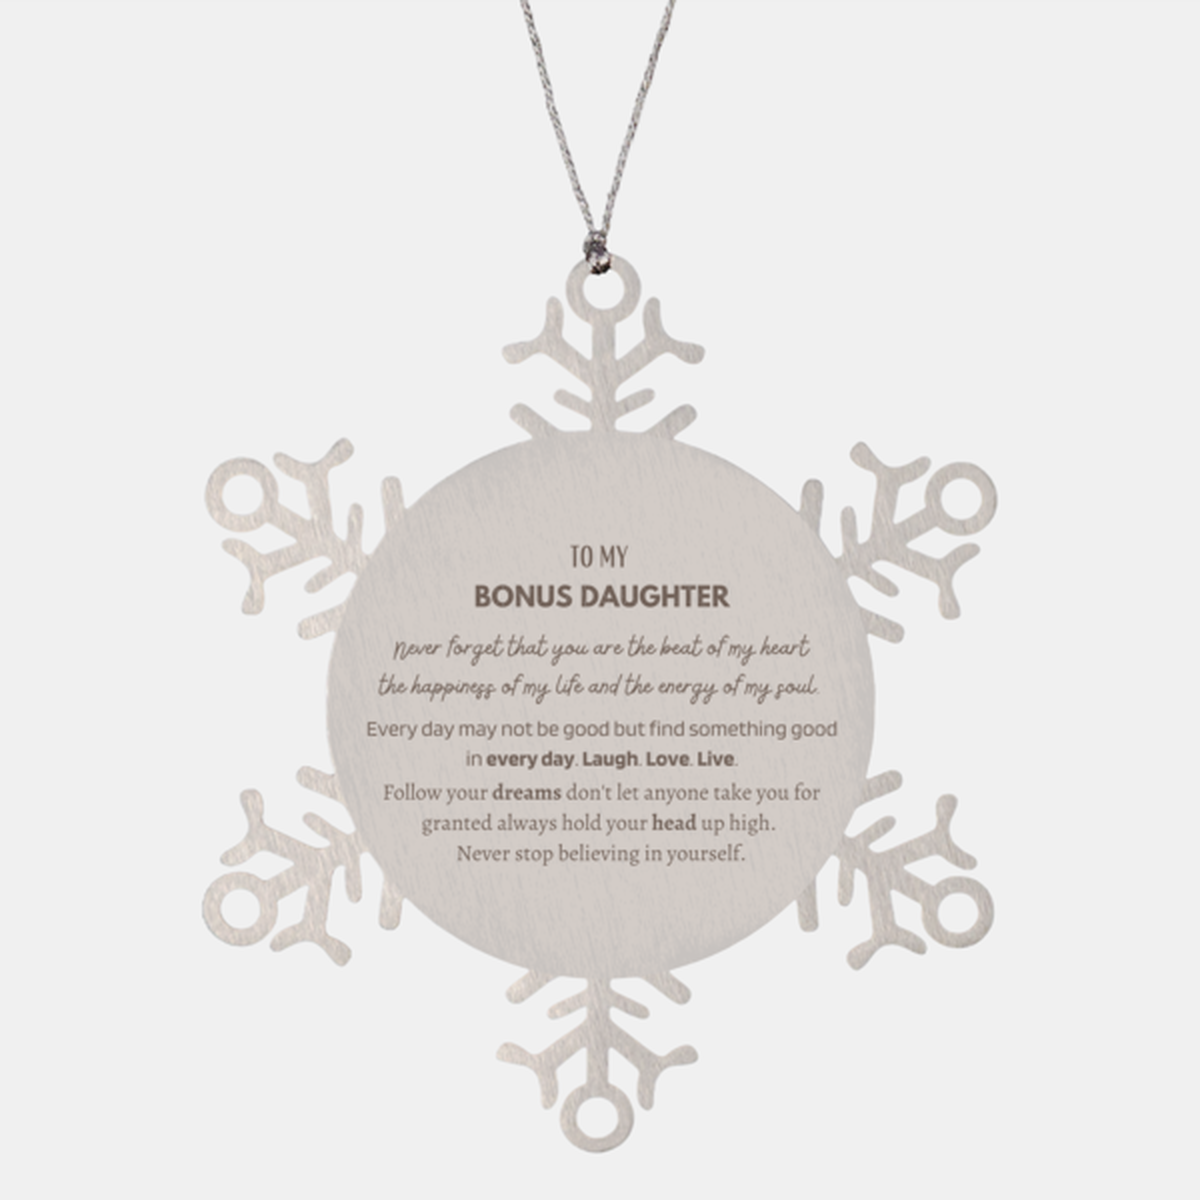 To My Bonus Daughter Ornament Gifts, Christmas Bonus Daughter Snowflake Ornament Present, Christmas Unique Motivational For Bonus Daughter, To My Bonus Daughter Never forget that you are the beat of my heart the happiness of my life and the energy of my s